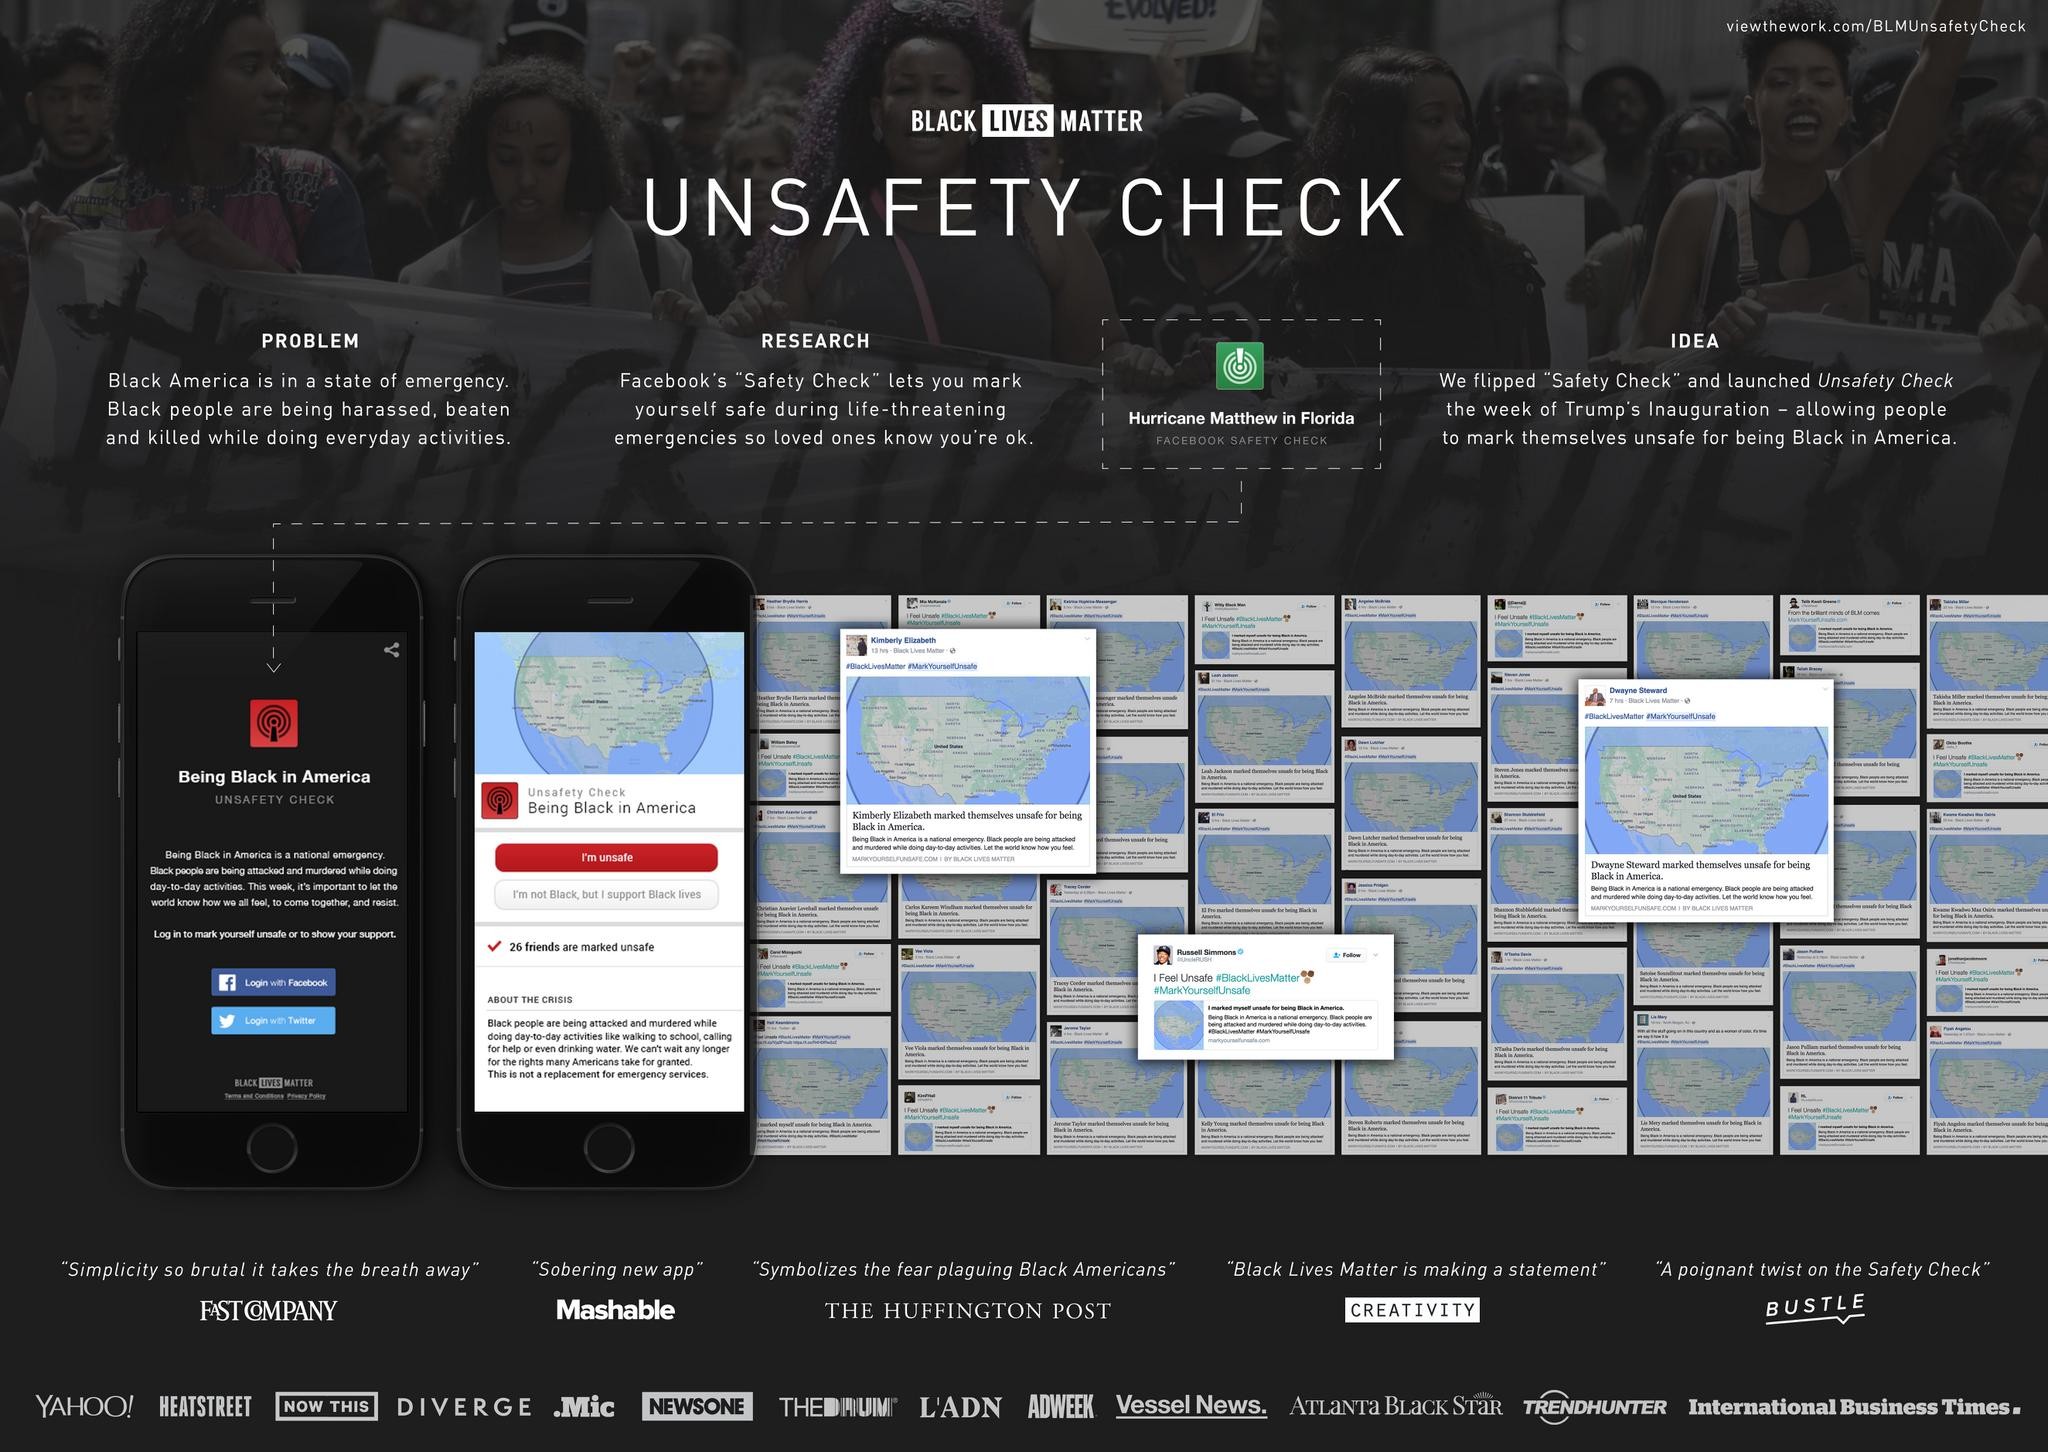 UNSAFETY CHECK